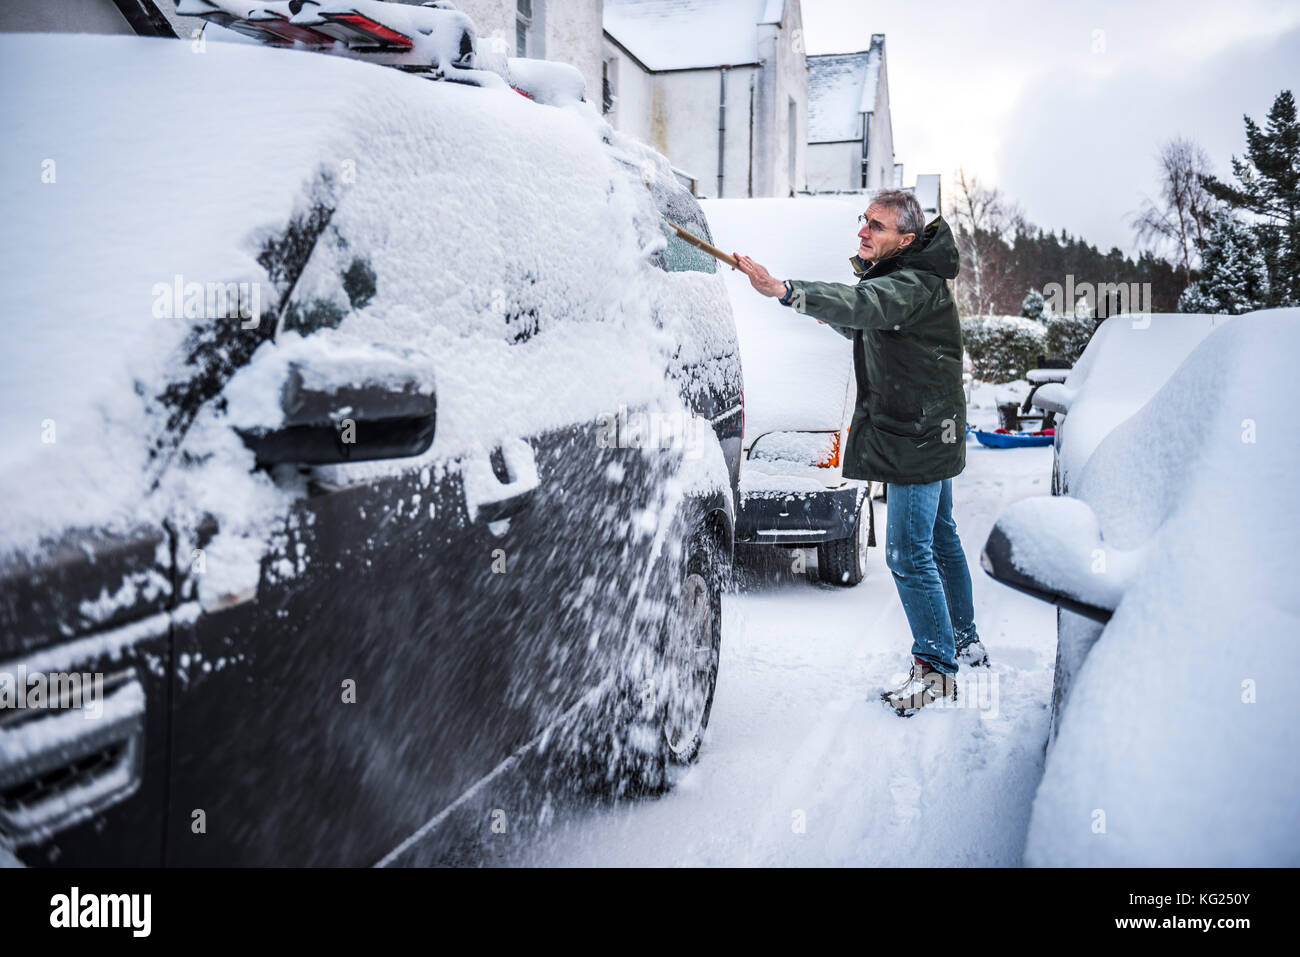 Removing snow from a car, Cairngorms National Park, Scotland, United Kingdom, Europe Stock Photo